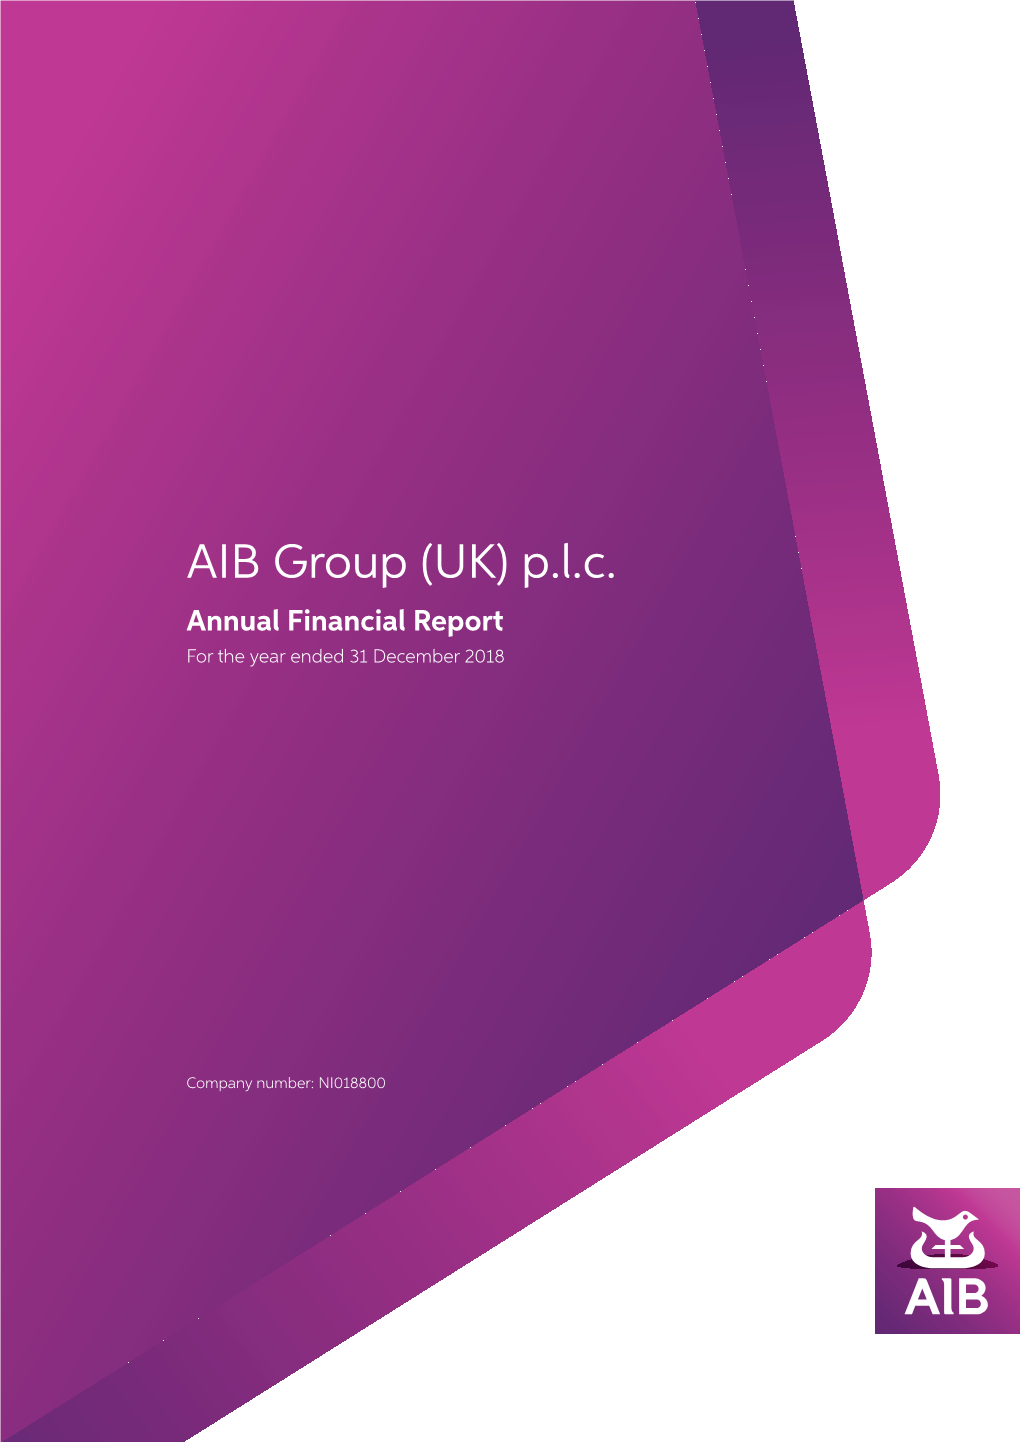 AIB Group (UK) P.L.C., Whilst Any Reference to ‘AIB UK Group’ Will Relate to AIB Group (UK) P.L.C